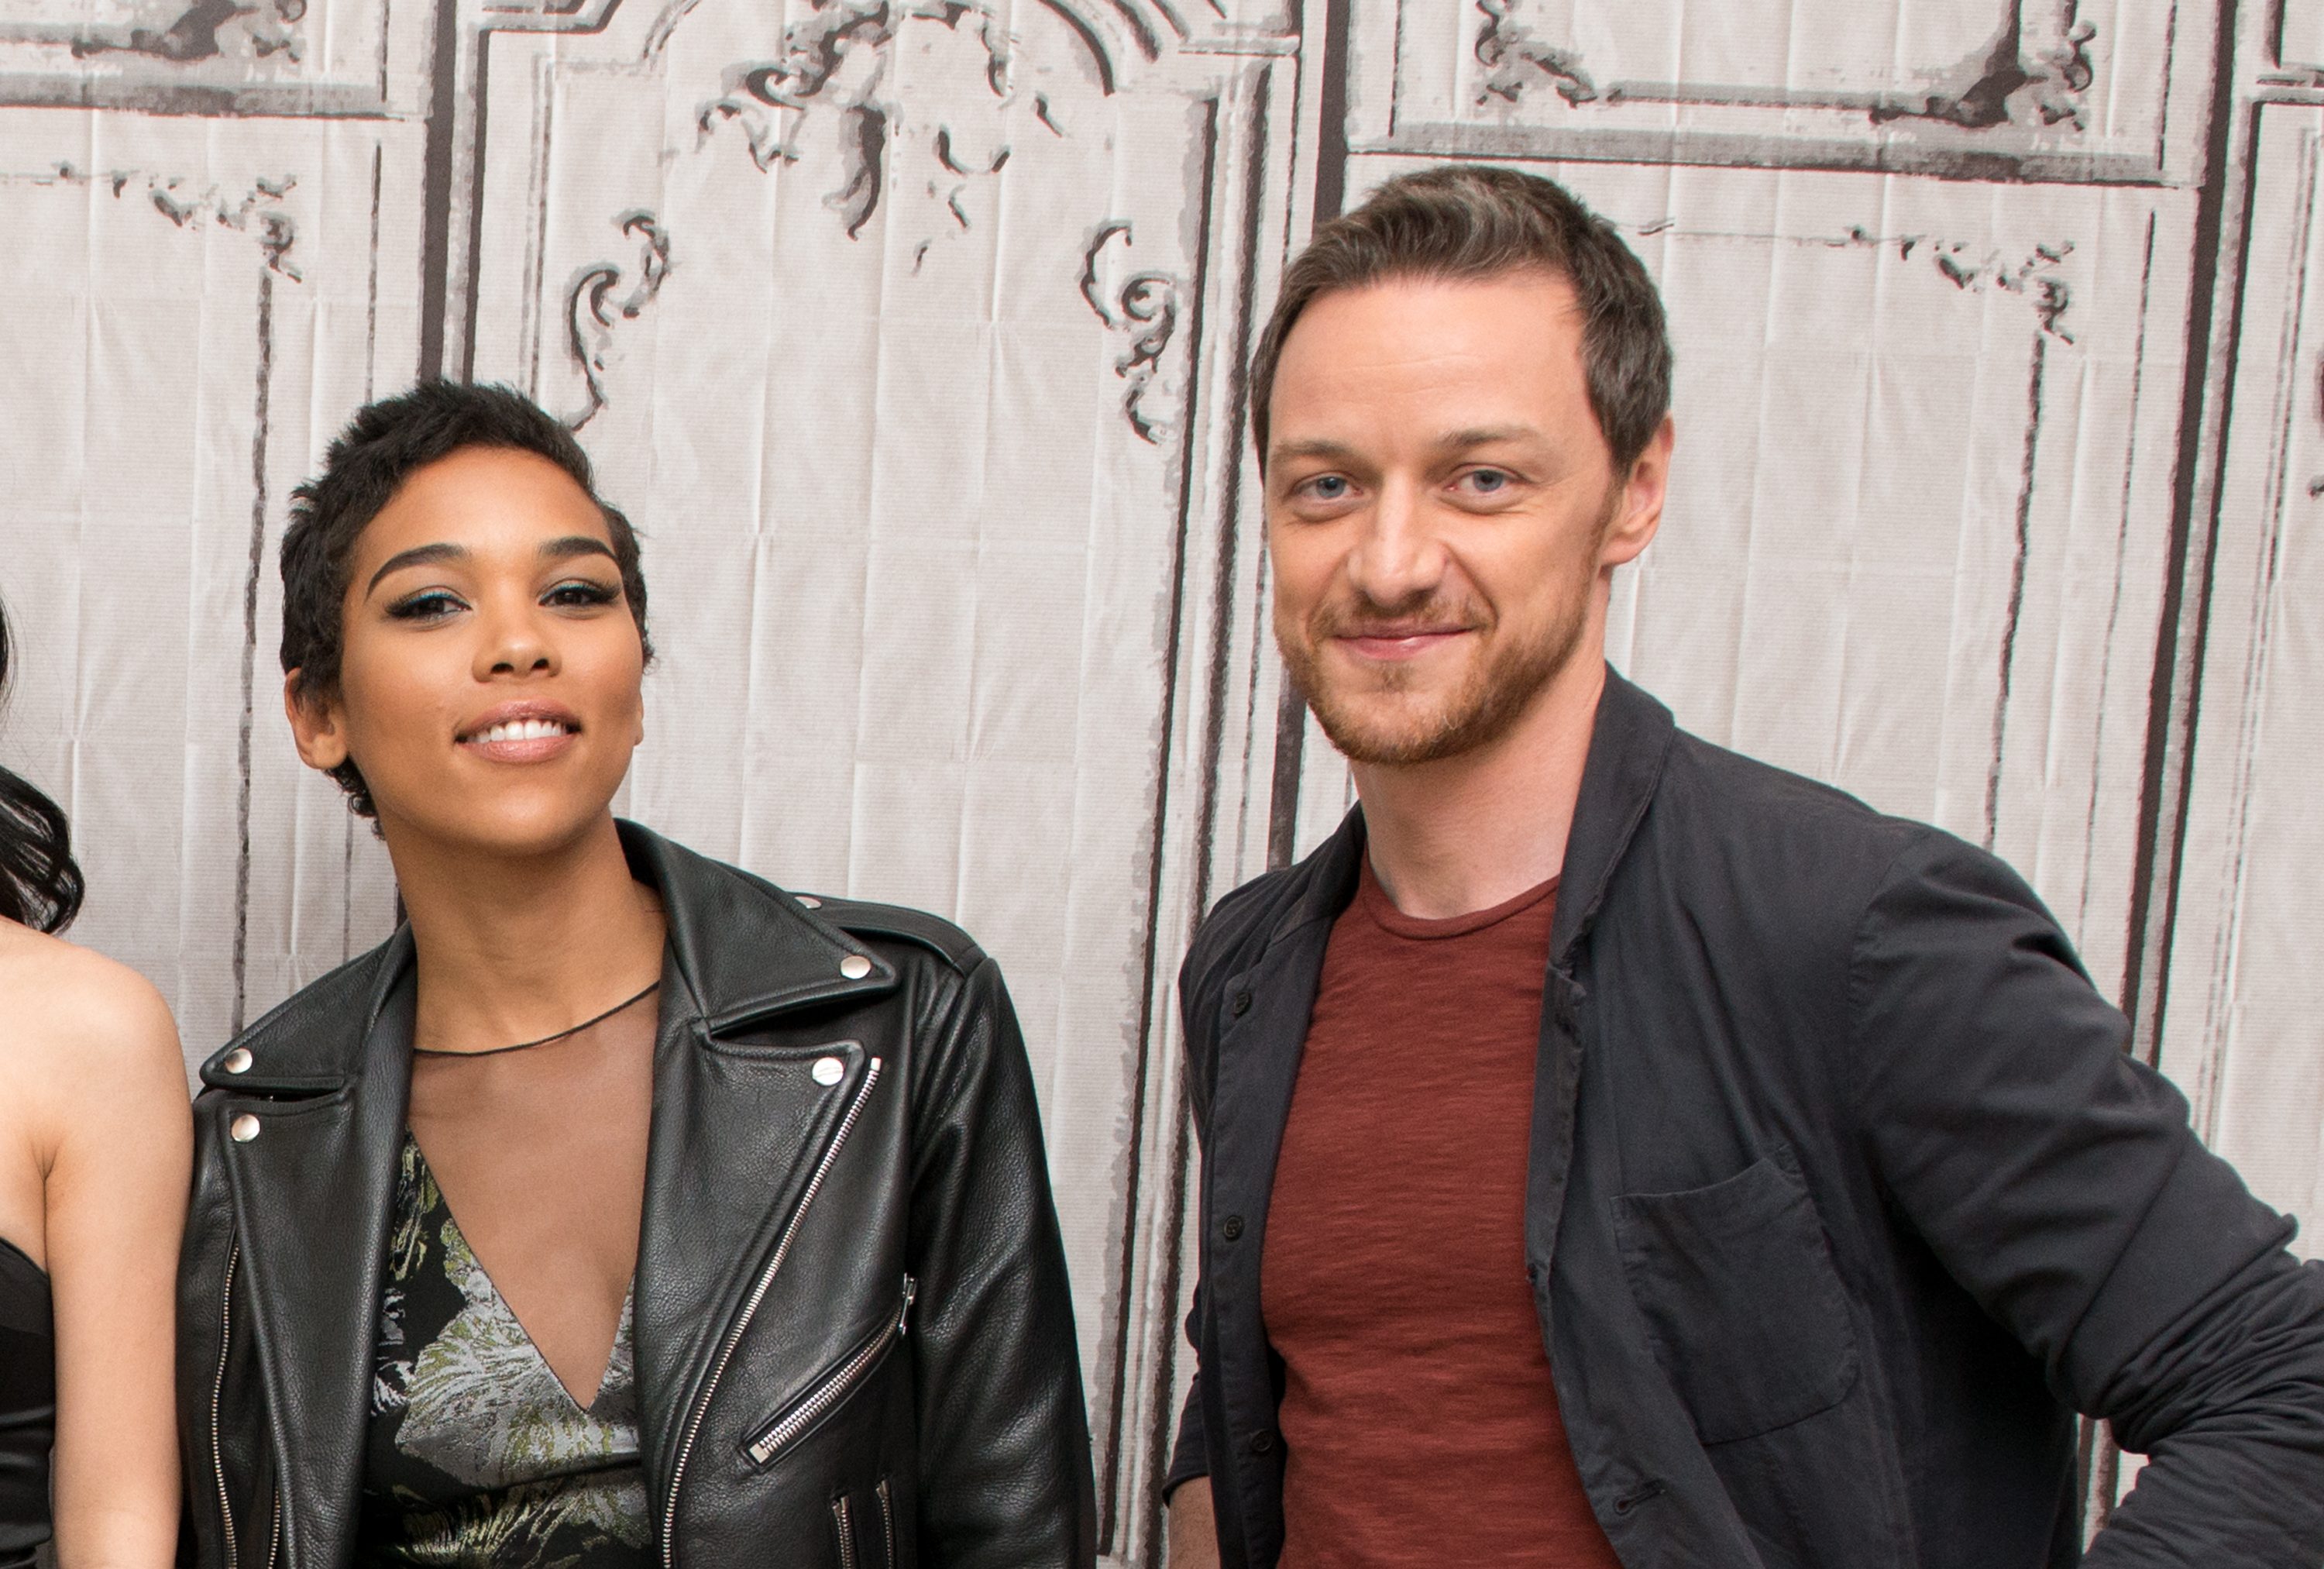 Alexandra Shipp and James McAvoy at AOL Studios in New York on May 24, 2016, in New York City. | Source: Getty Images